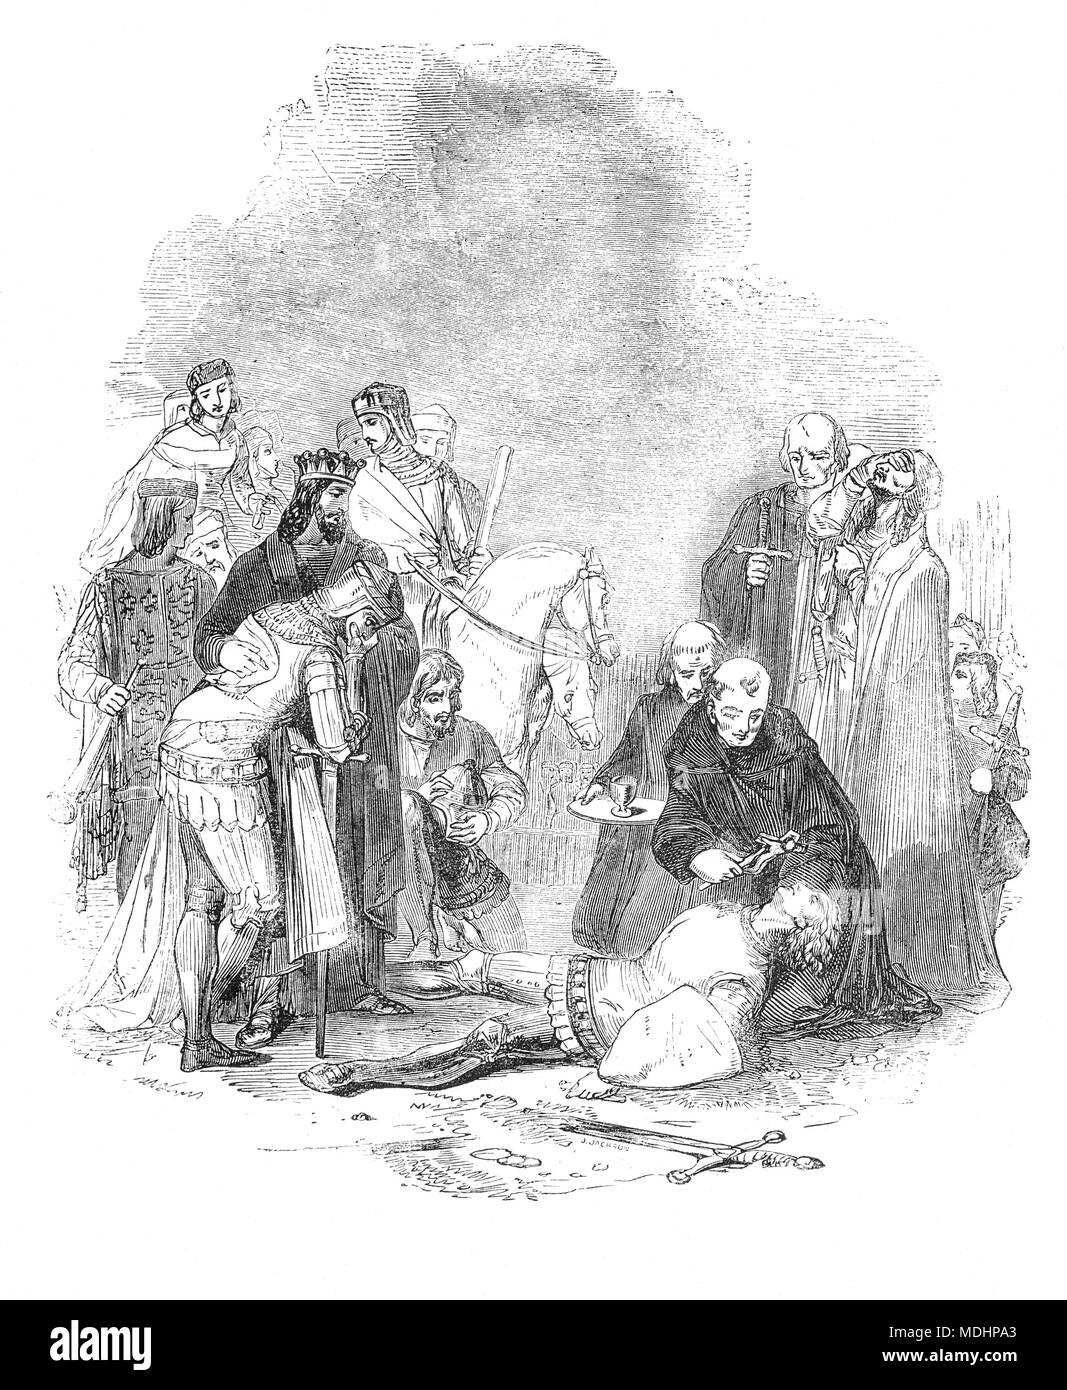 The death of Sir John Chandos in 1369 during a skirmish with the French. He was  medieval English knight and close friend of Edward, the Black Prince and a founding member and 19th Knight of the Order of the Garter in 1348. Described by the medieval historian Froissart as 'wise and full of devices', as a military strategist Chandos is believed to have been the mastermind behind three of the most important English victories of the Hundred Years War: the Battle of Crécy, the Battle of Poitiers and the Battle of Auray. Stock Photo